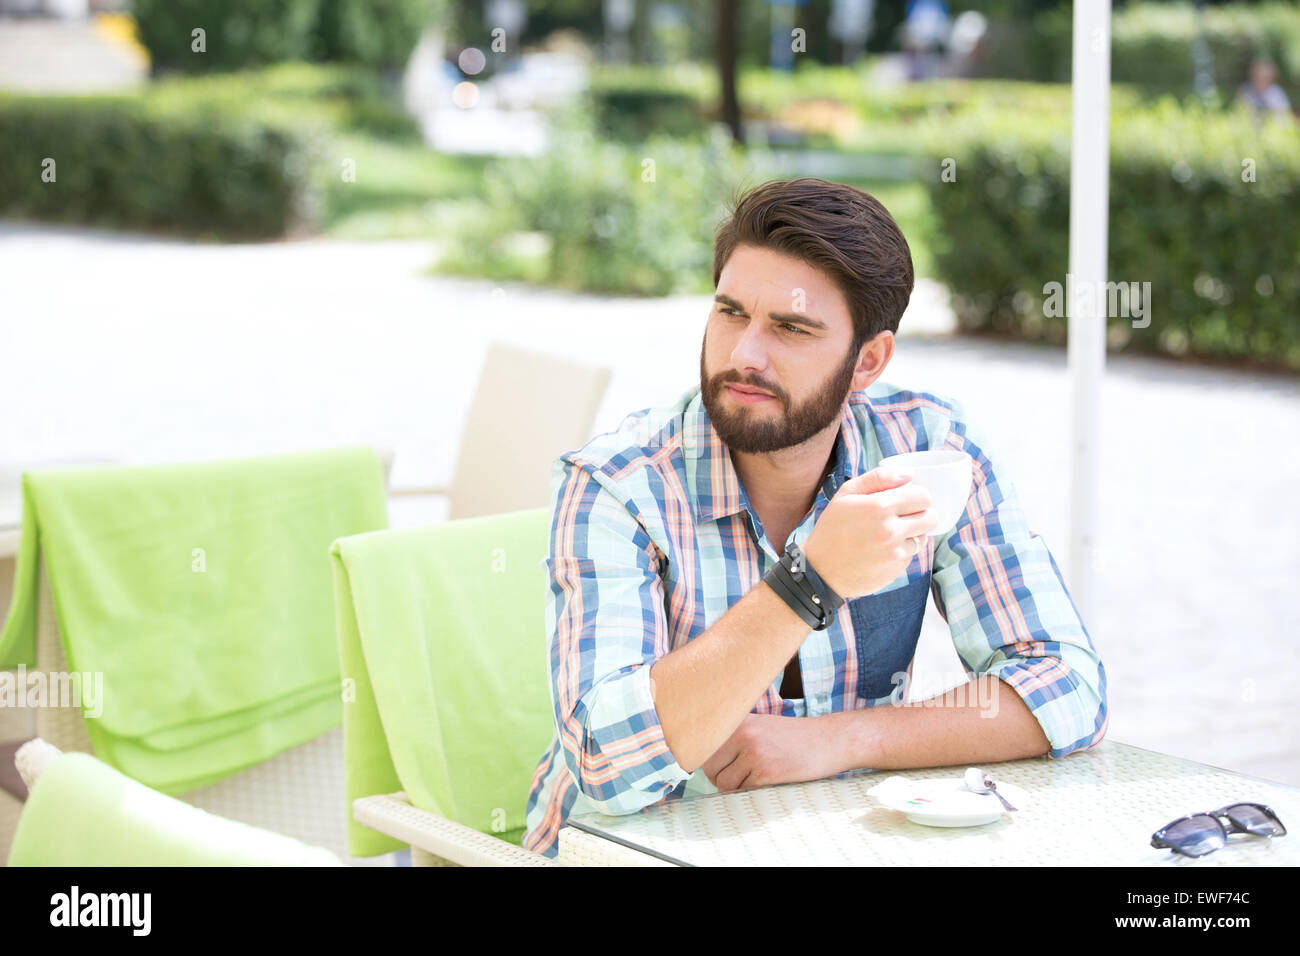 Thoughtful man holding coffee cup at sidewalk cafe Stock Photo